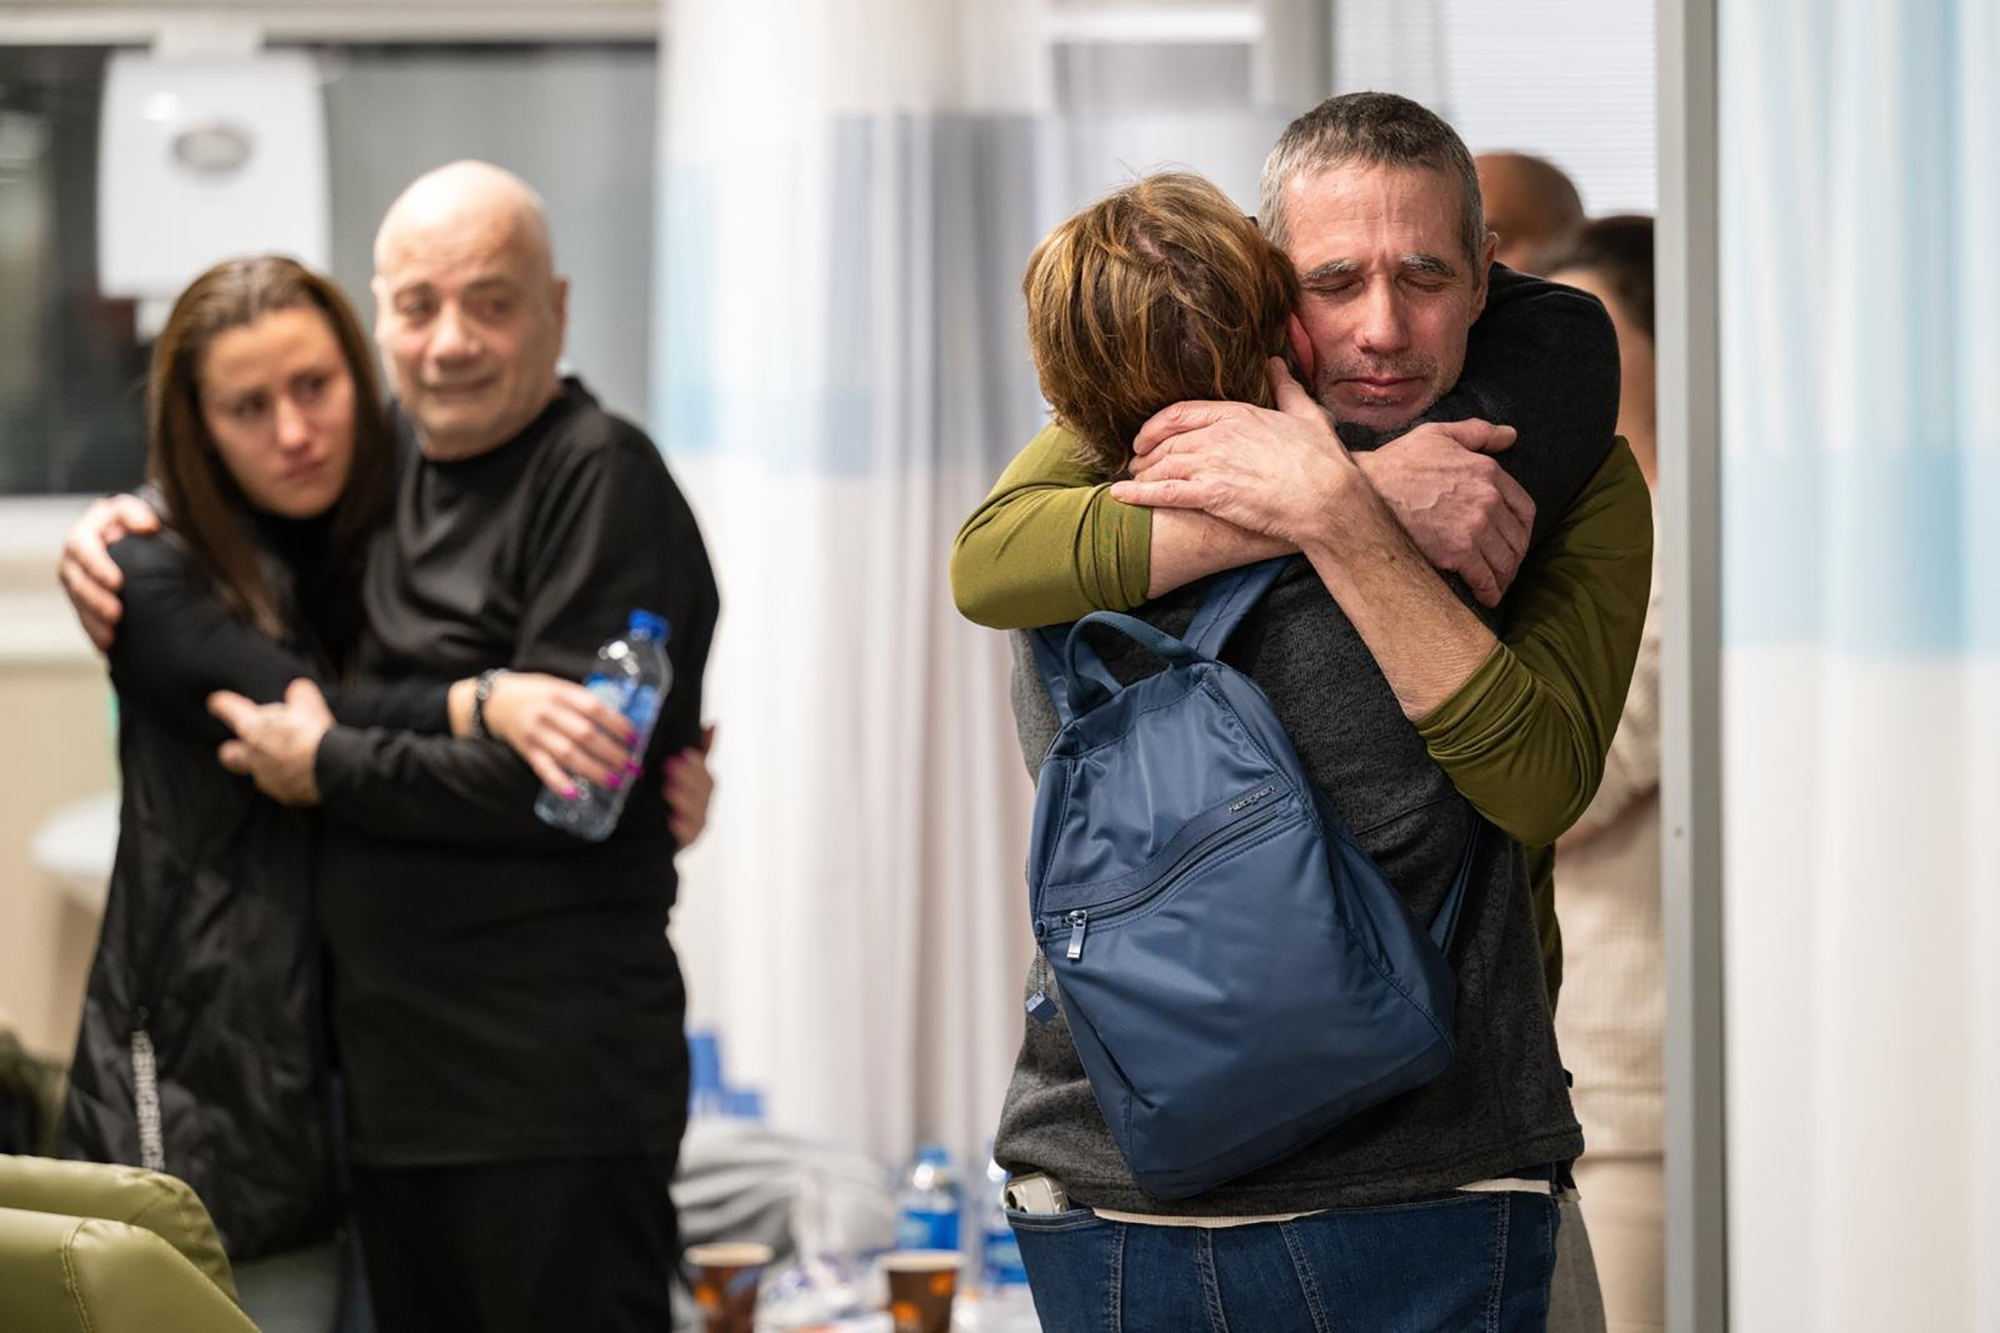 Louis Har, left, and Fernando Simon Marman reunite with loved ones at Sheba Medical Center, in Ramat Gan, Israel, on February 12.